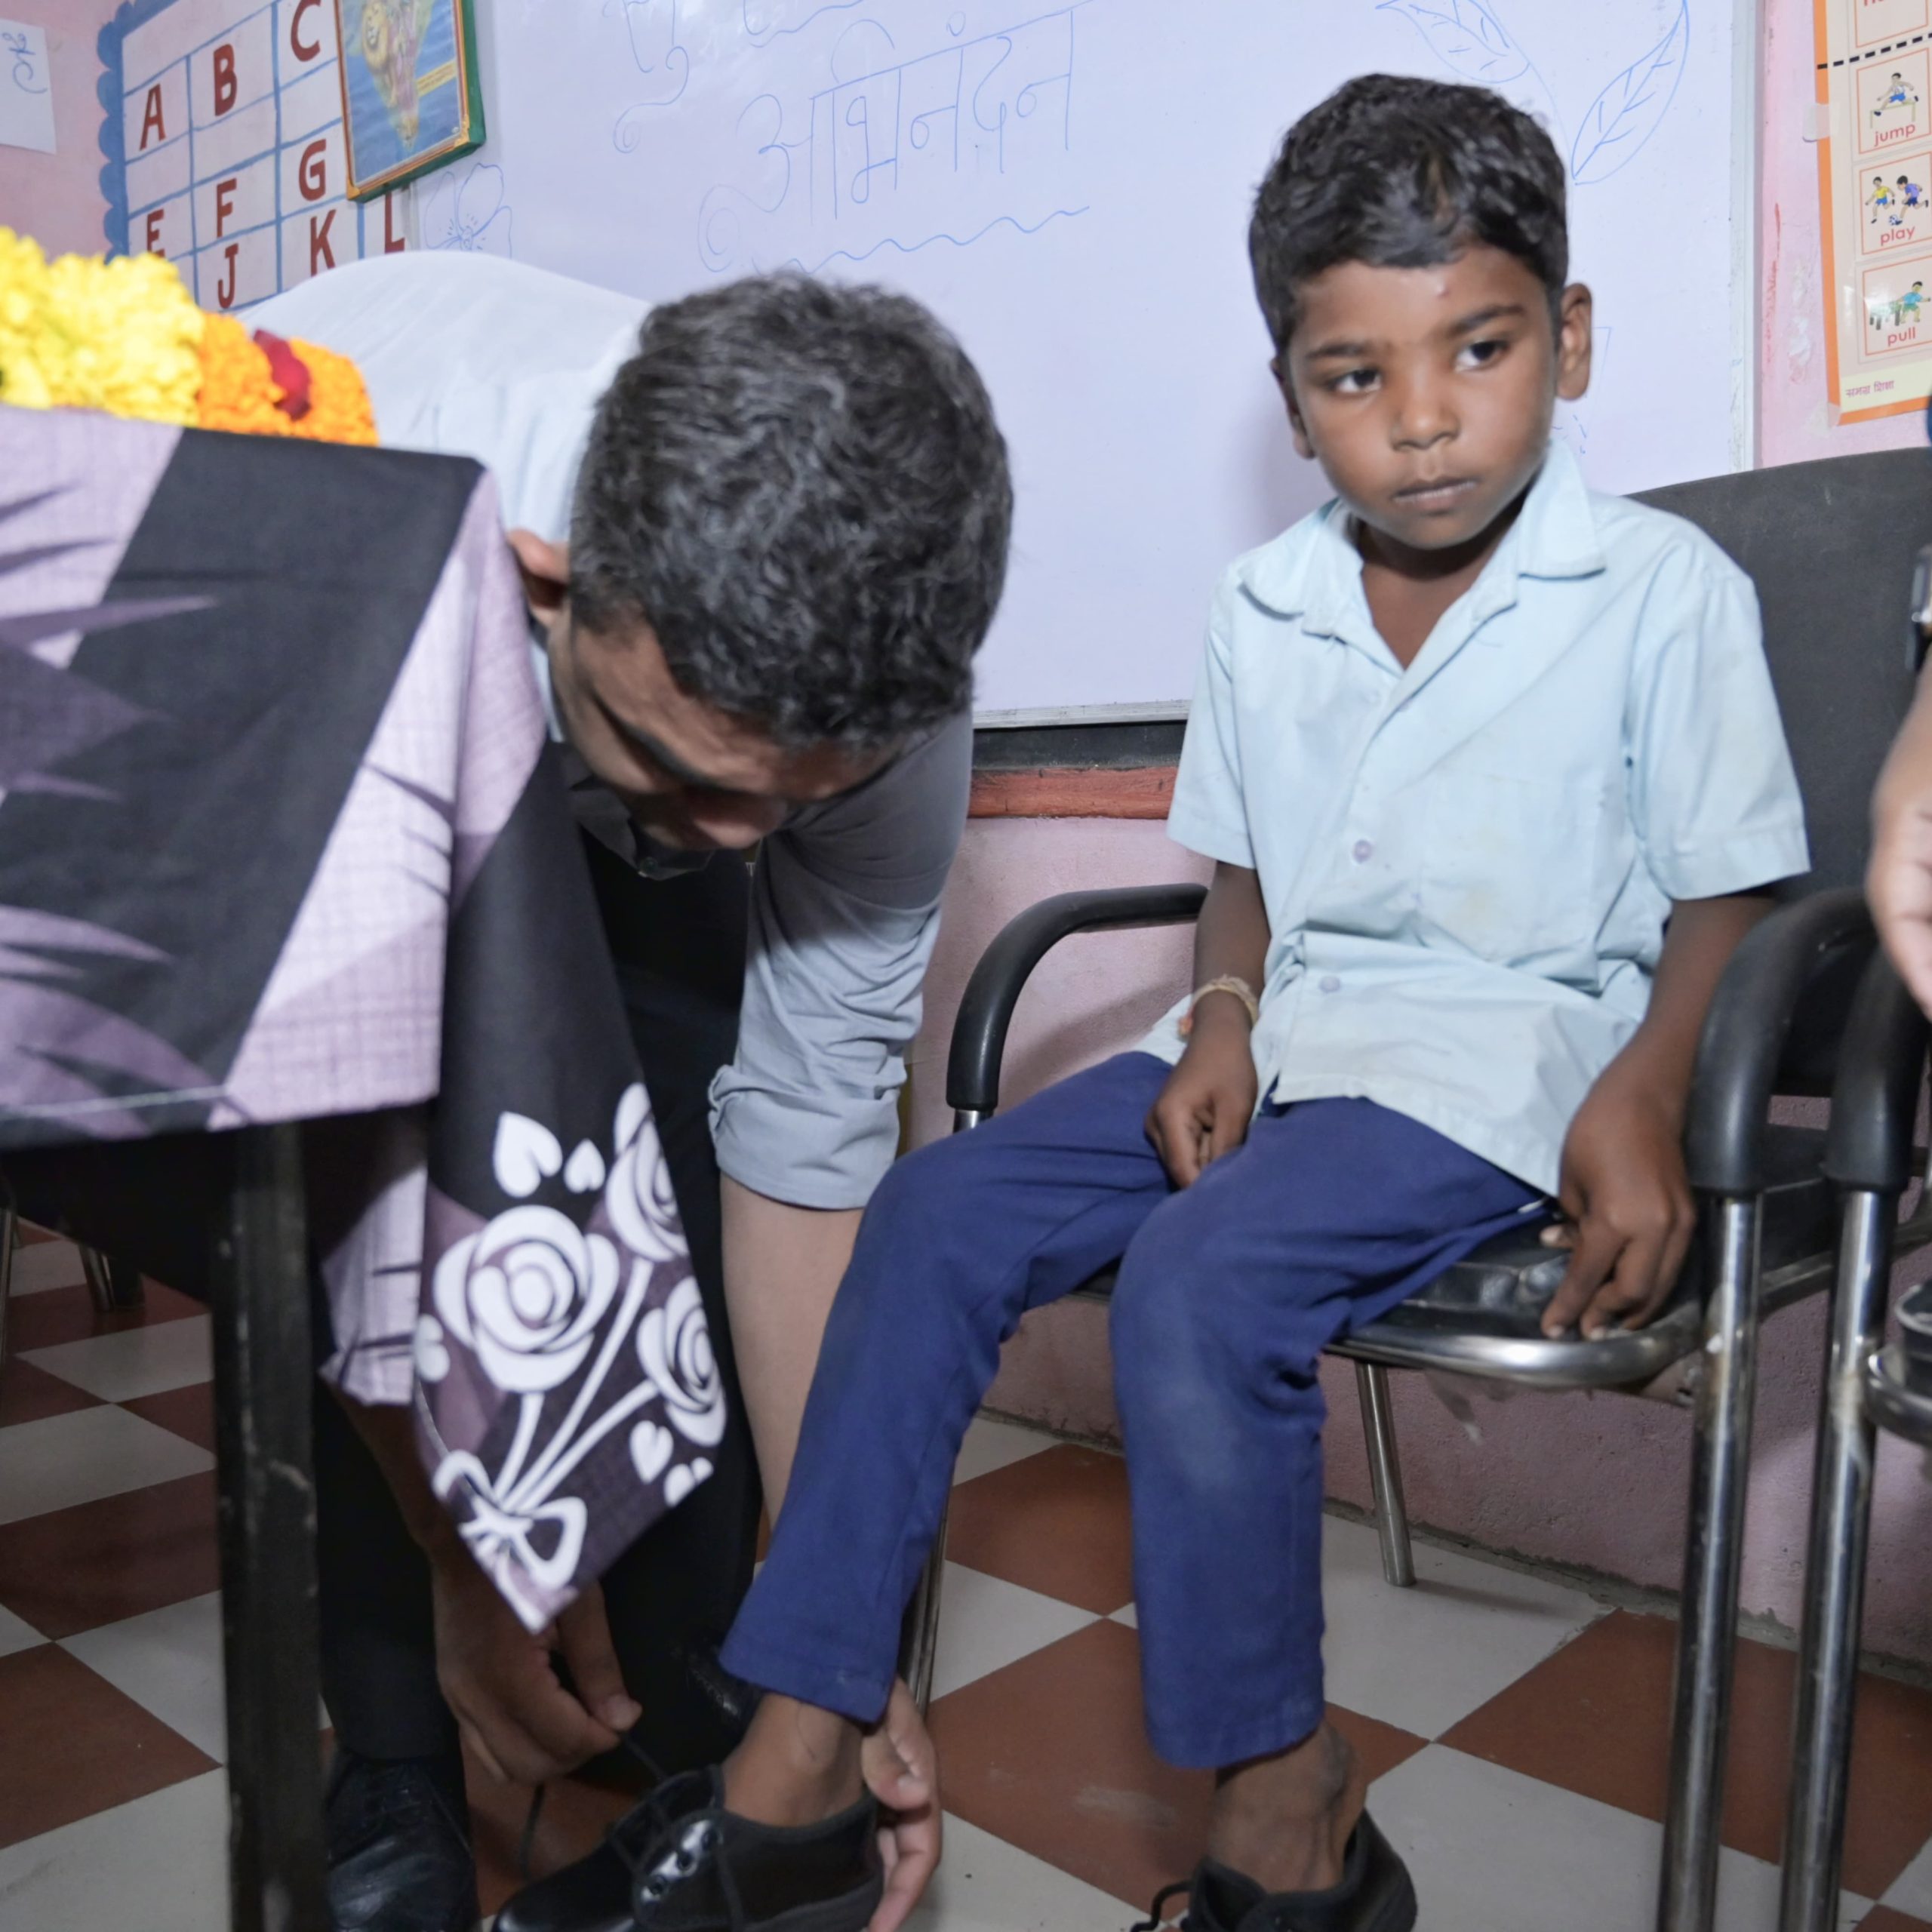 Collector Gave Shoes to Student